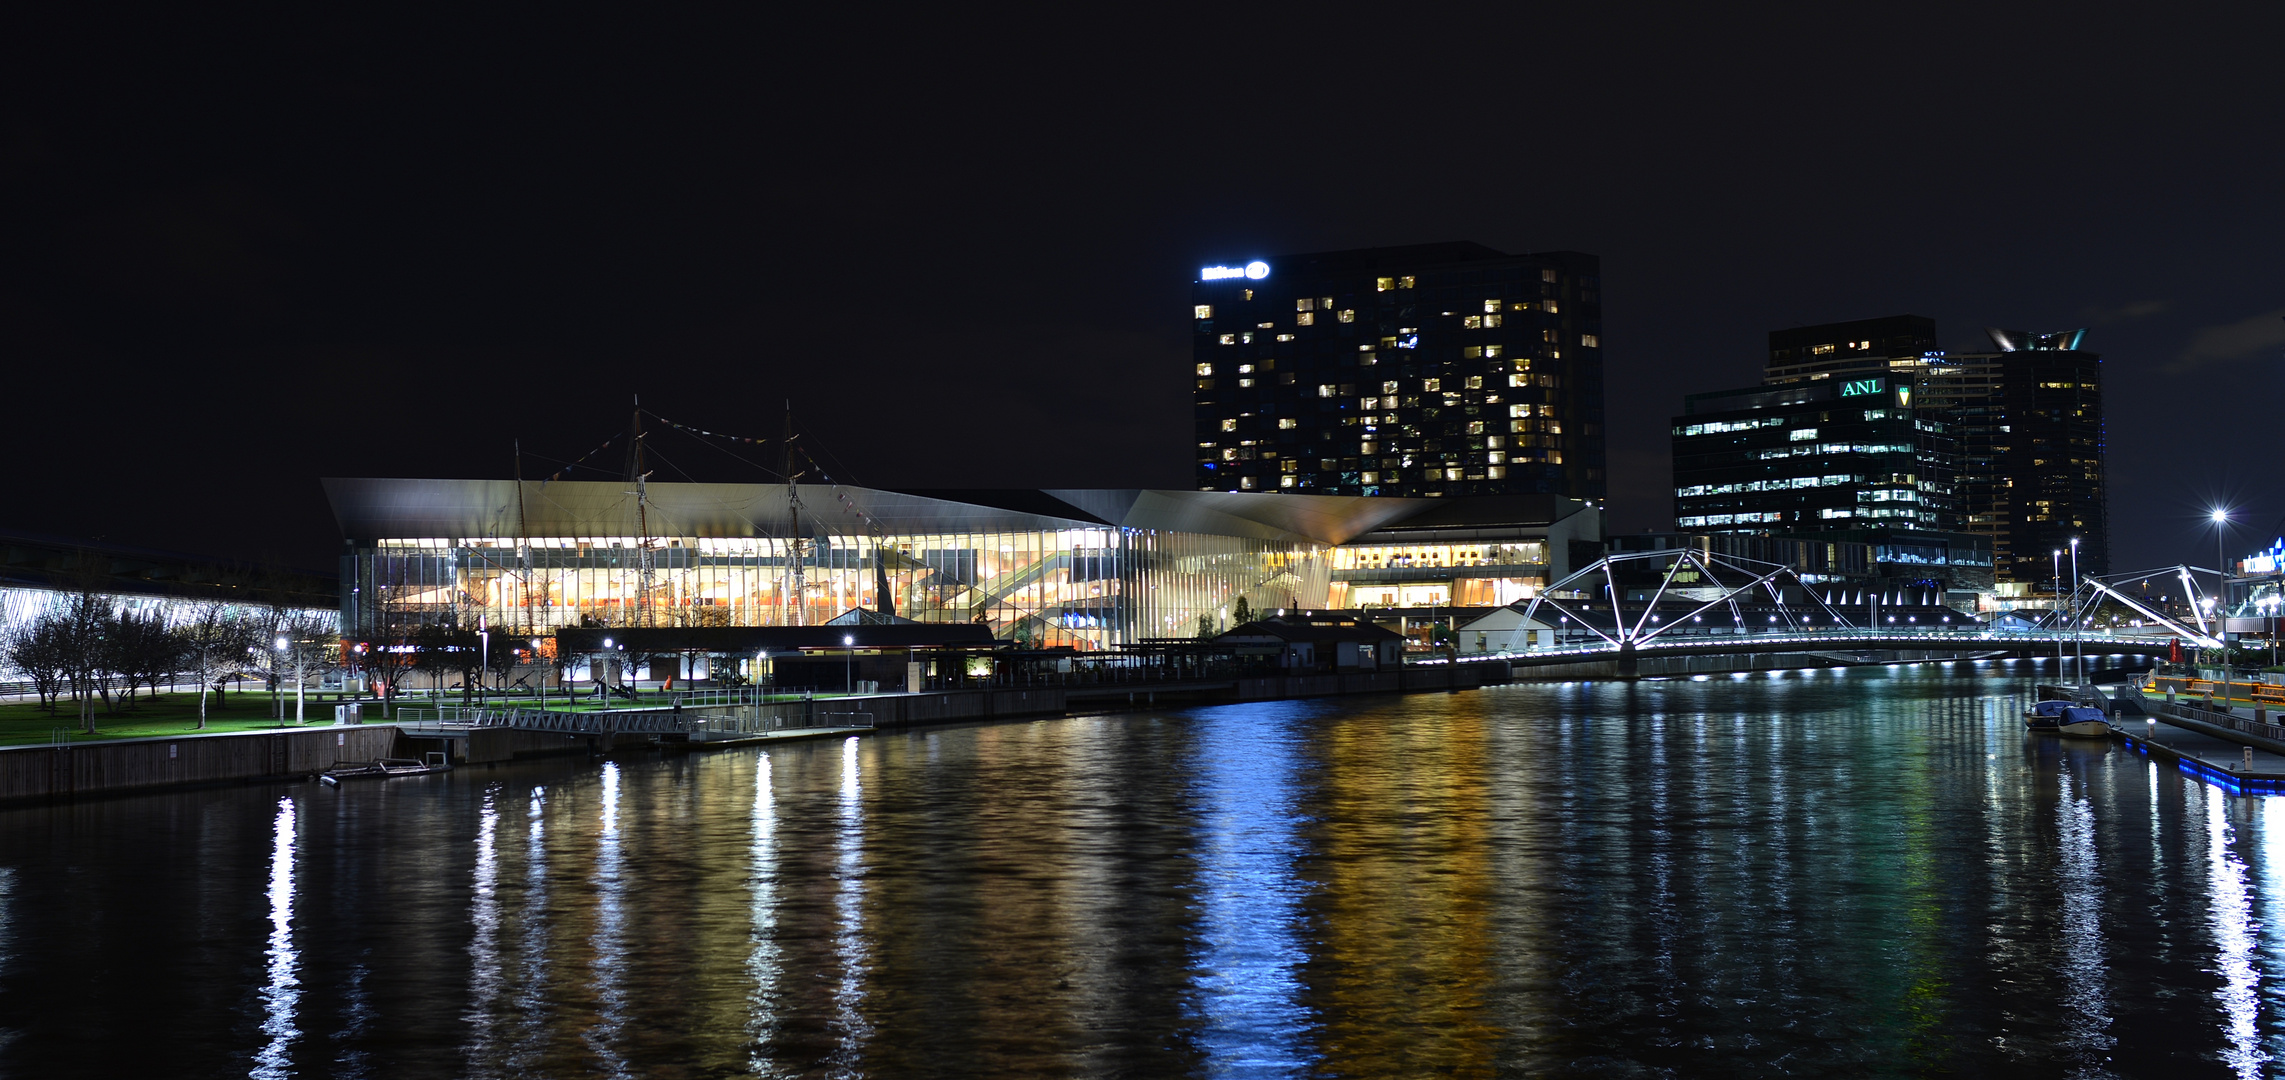 Melbourne Convention and Exhibition Center